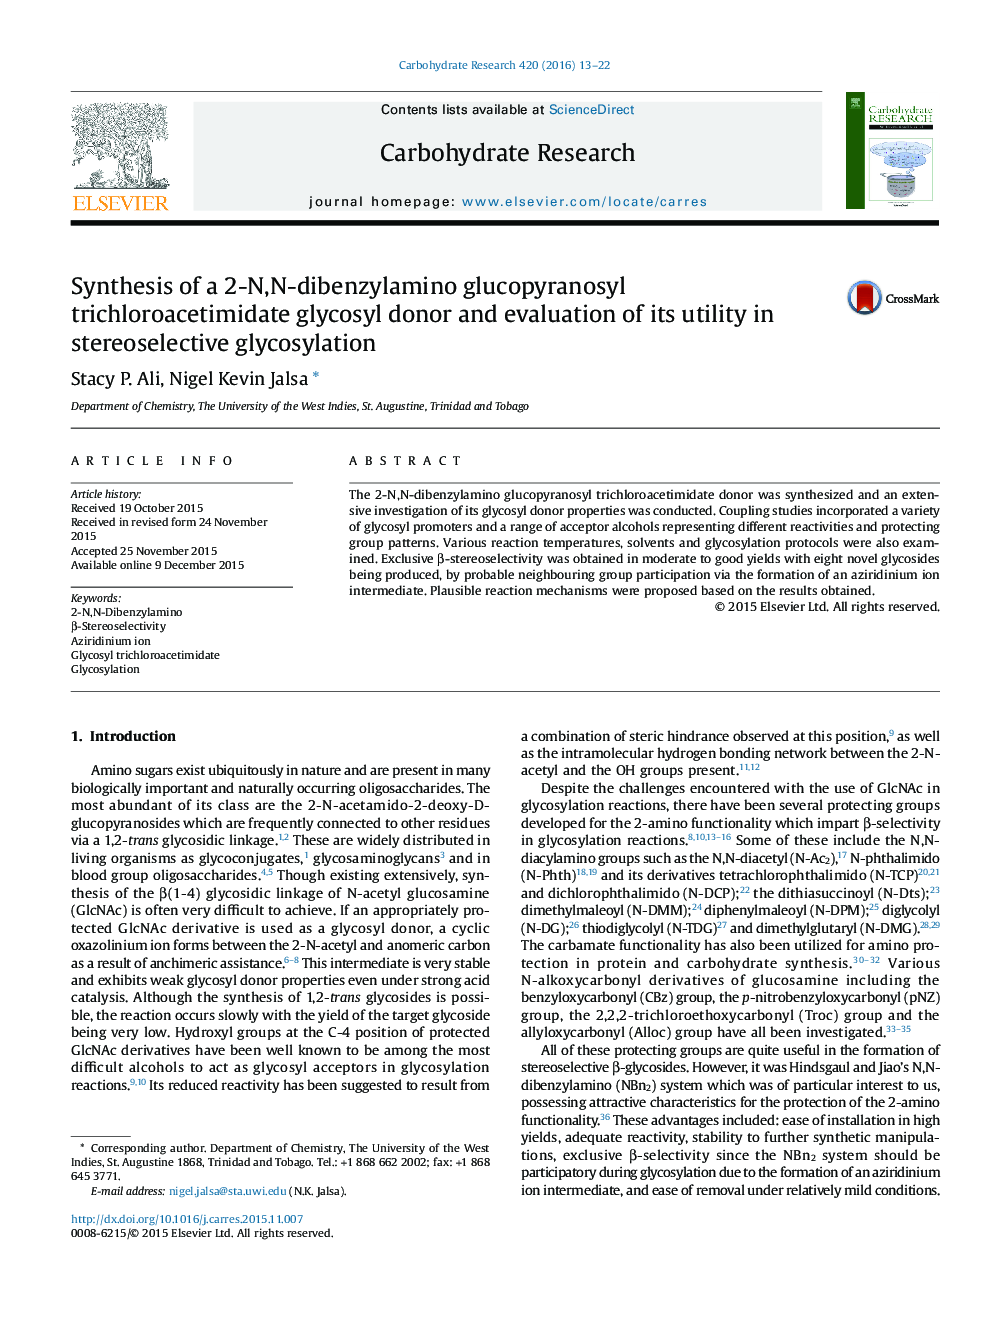 Synthesis of a 2-N,N-dibenzylamino glucopyranosyl trichloroacetimidate glycosyl donor and evaluation of its utility in stereoselective glycosylation